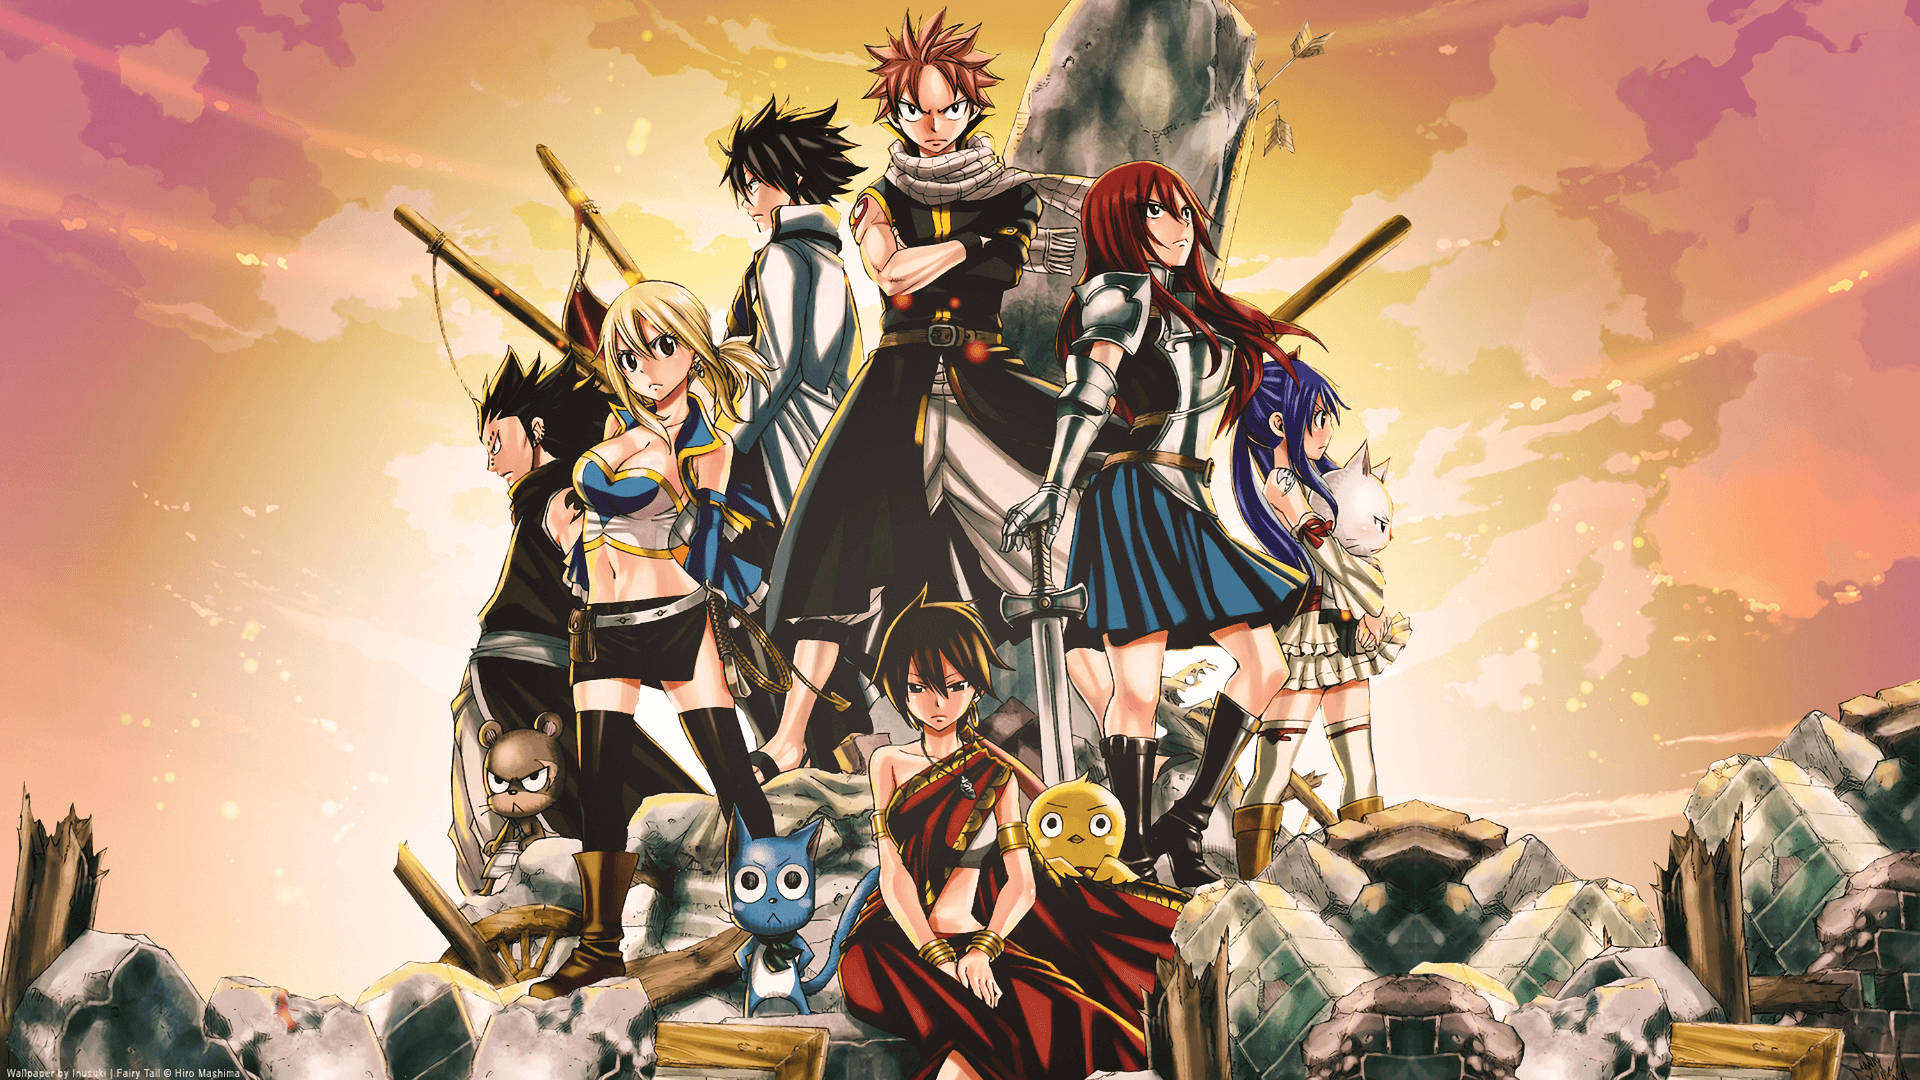 Top 999+ Fairy Tail Wallpaper Full HD, 4K✅Free to Use